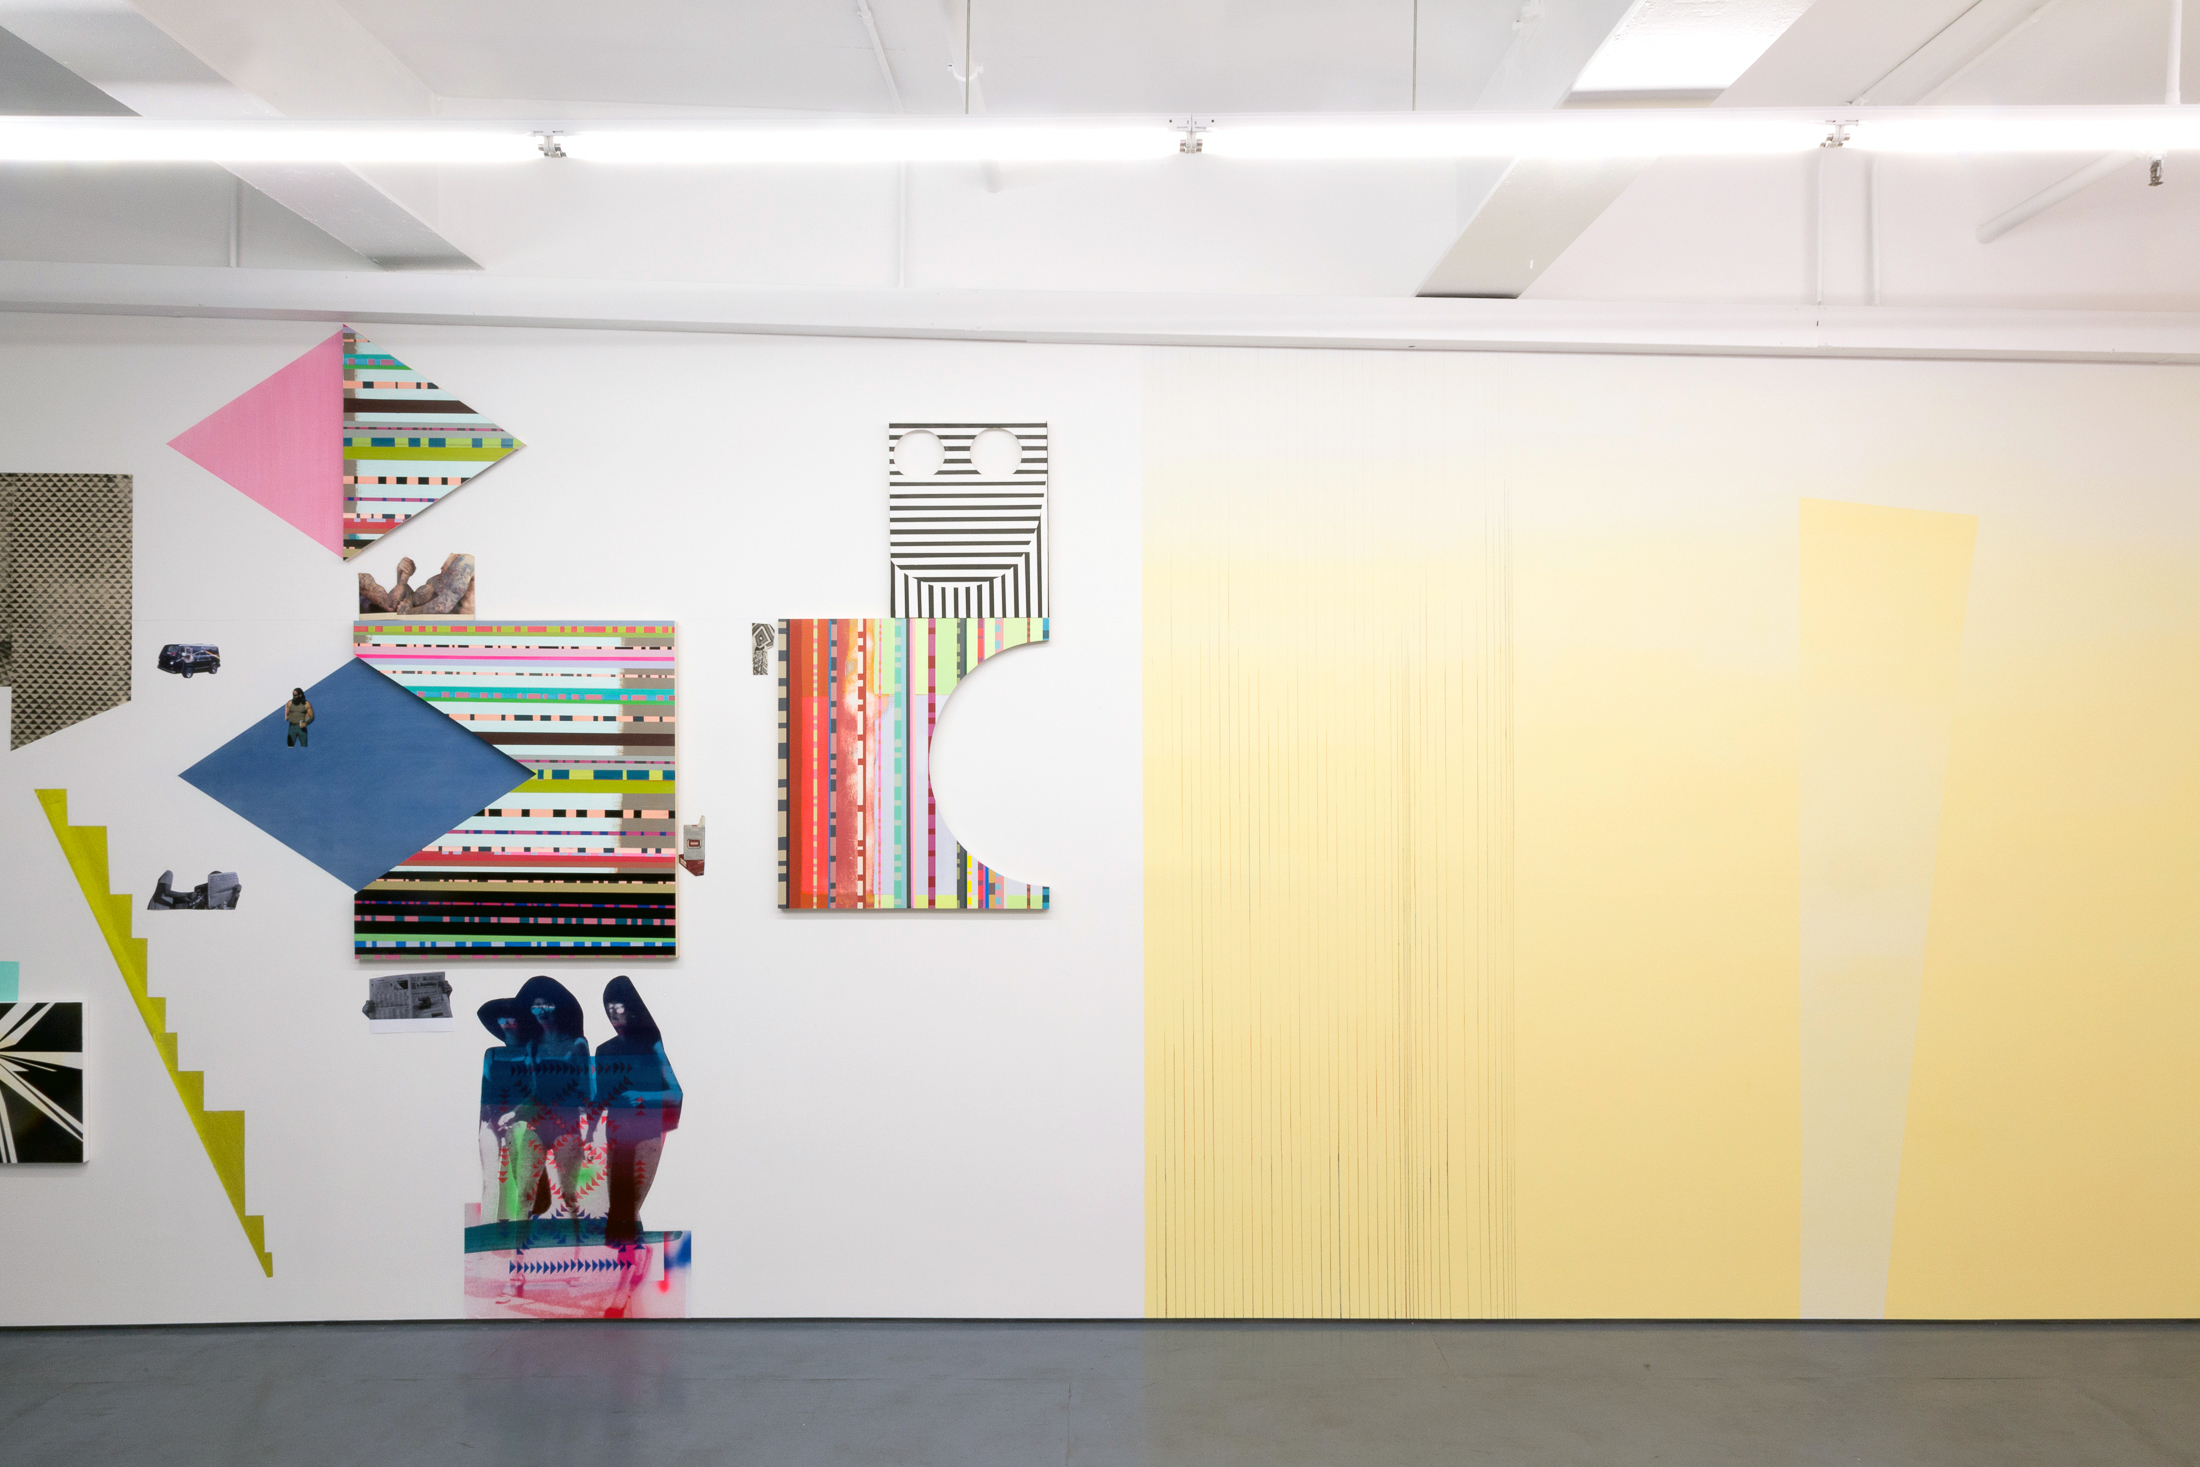  Installation view of Abstract Wall Painting III at Transmitter 